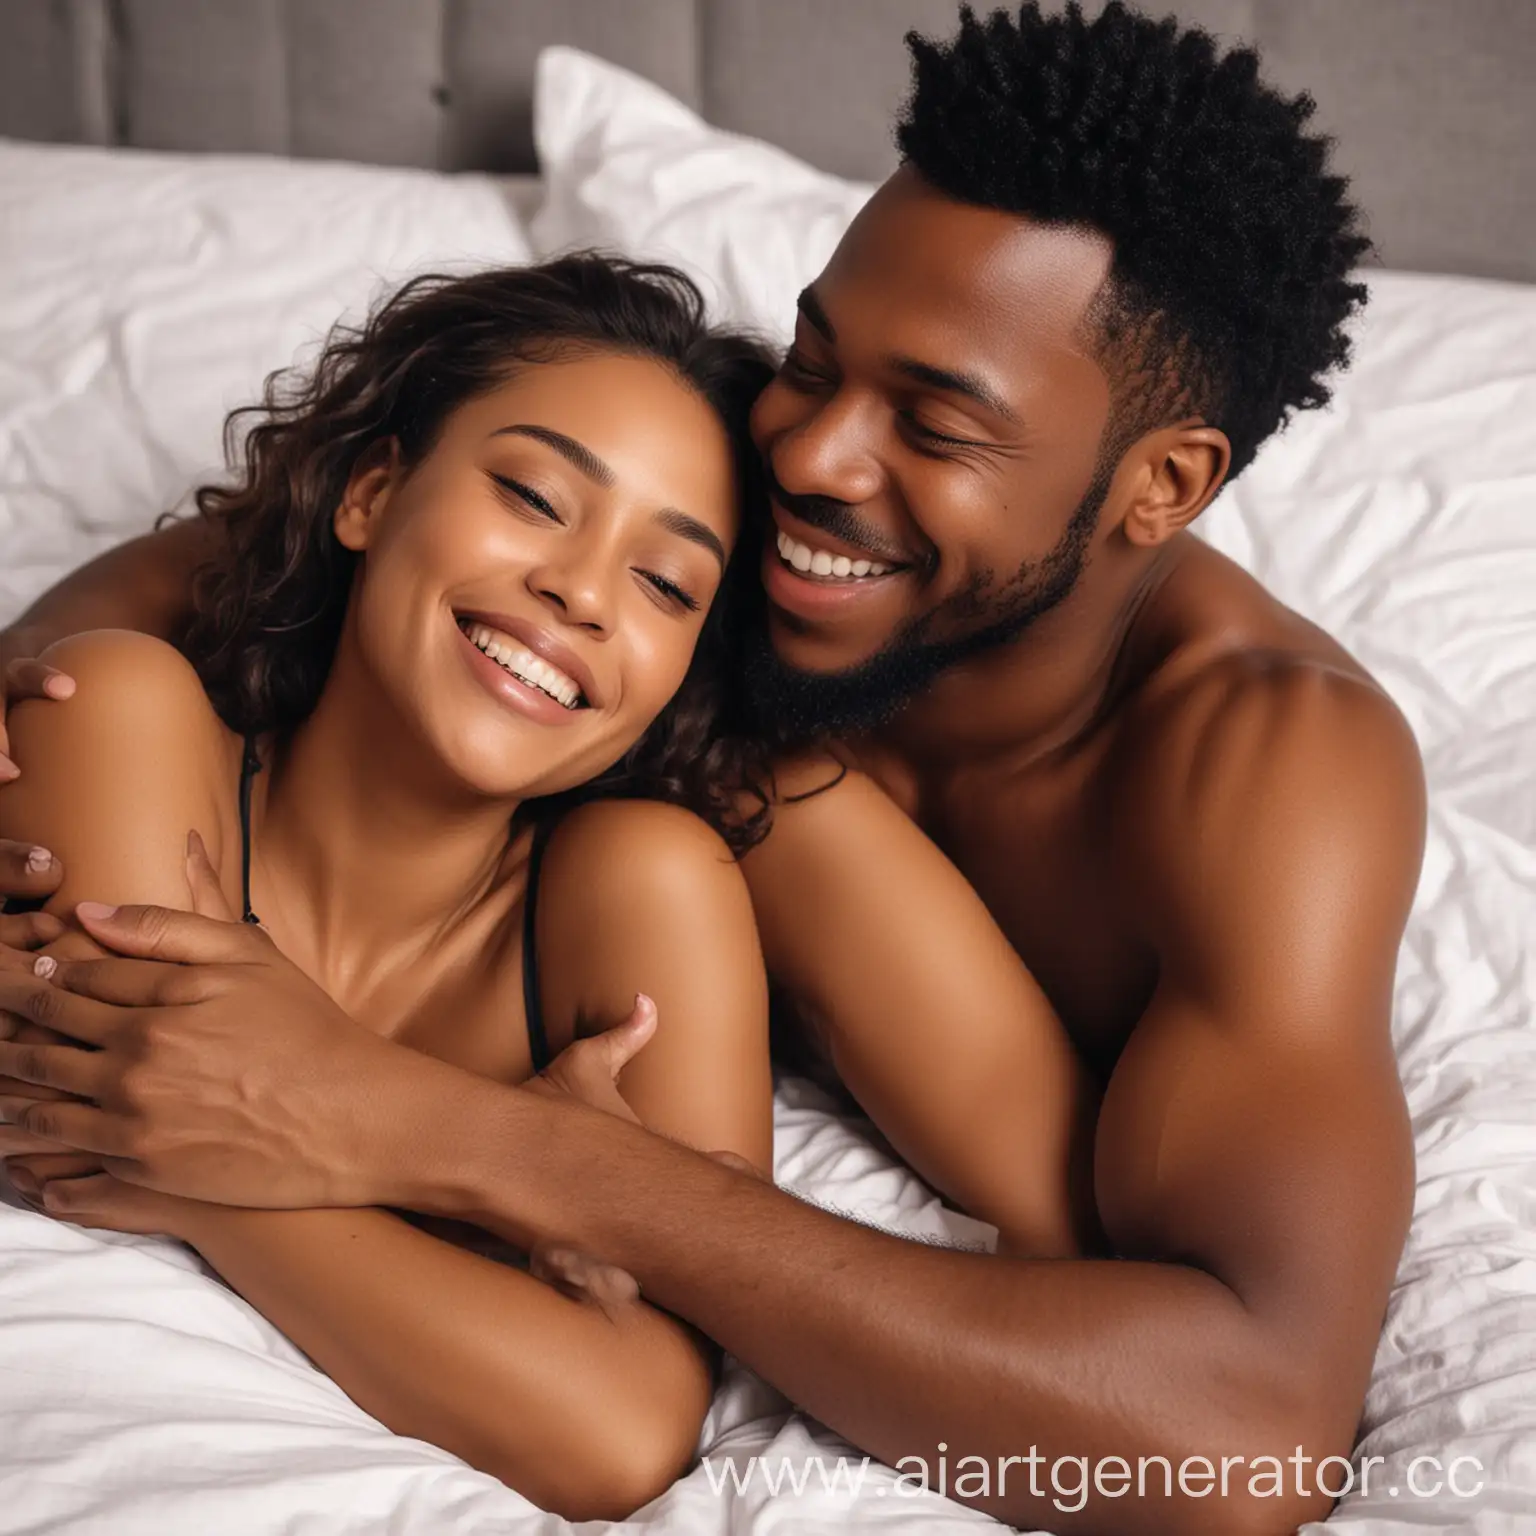 Joyful-African-American-Couple-Embracing-in-Bed-After-Intimate-Moment